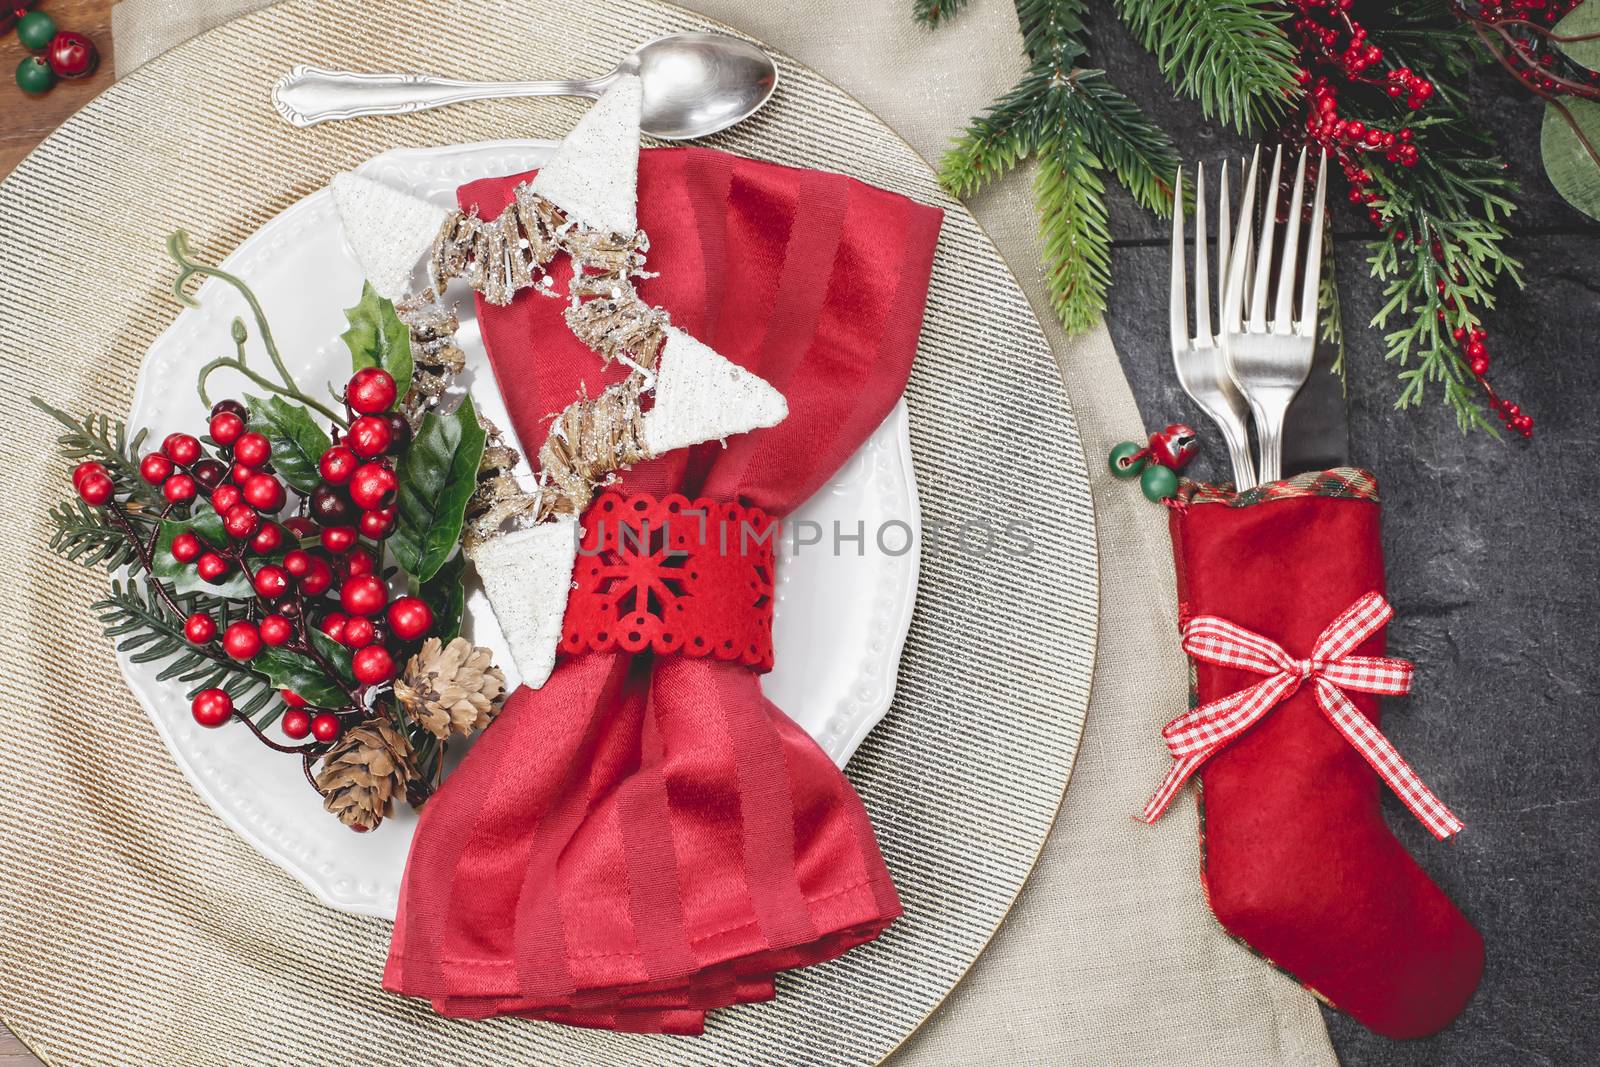 Christmas stocking place settings with festive decorations